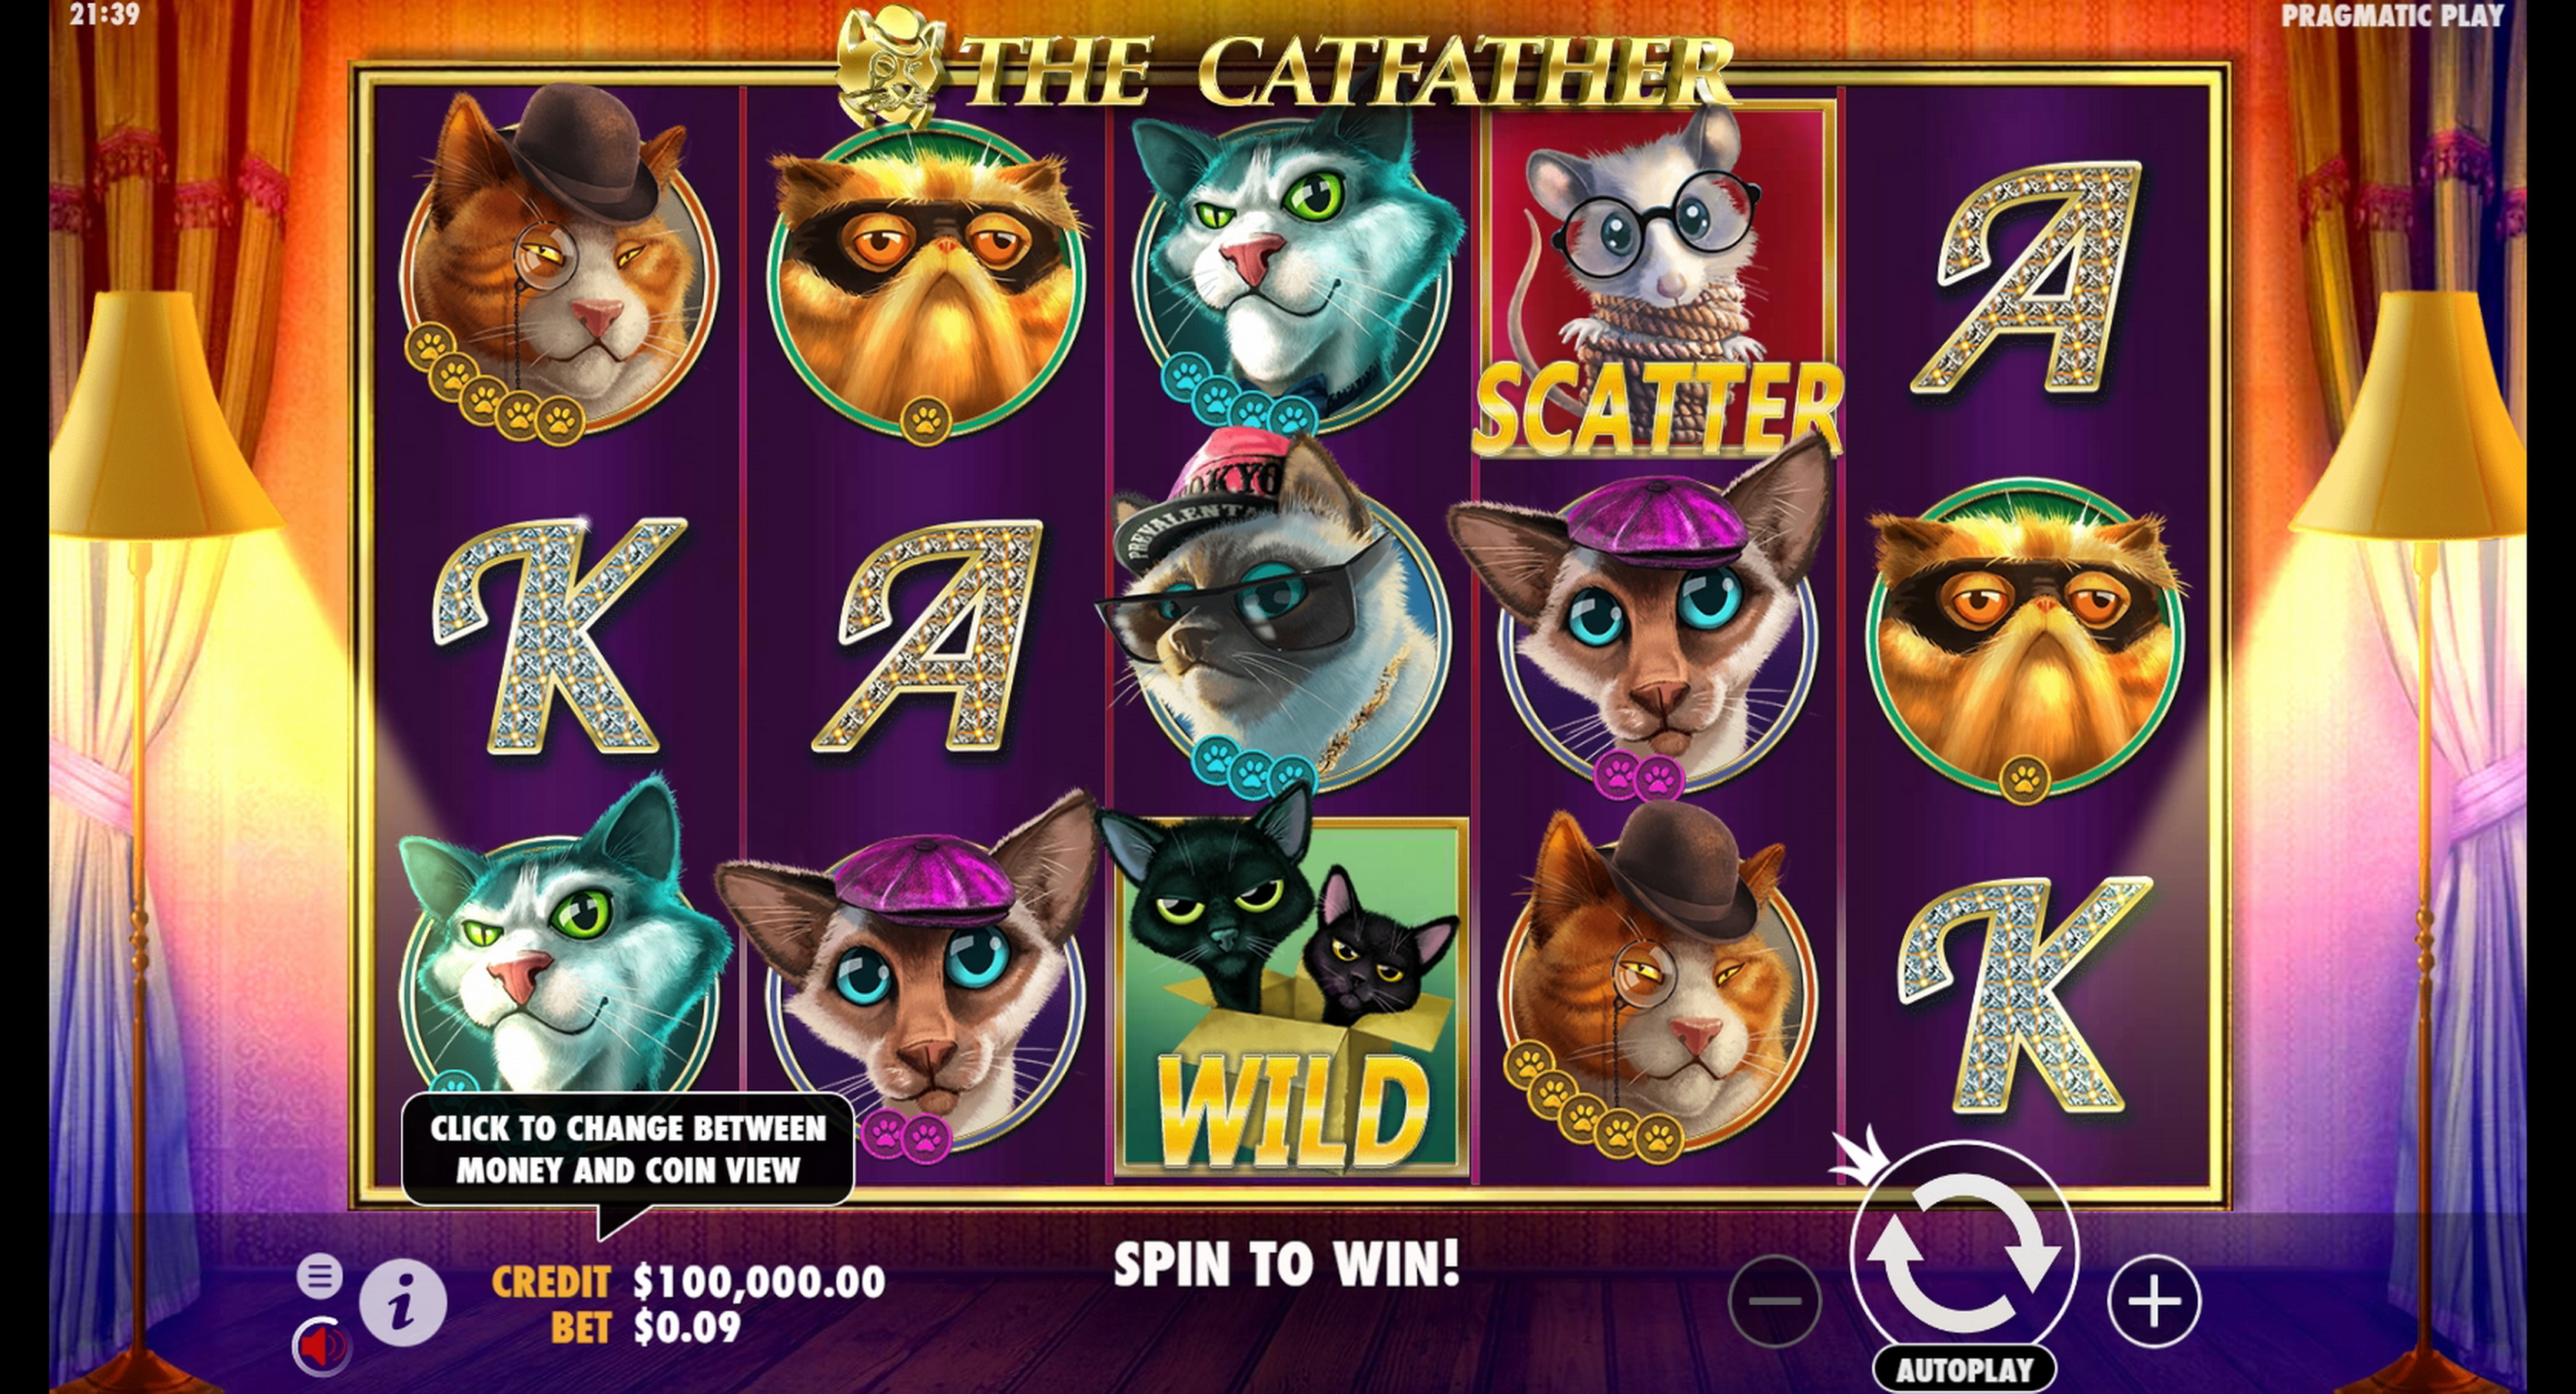 Reels in The Catfather Slot Game by Pragmatic Play